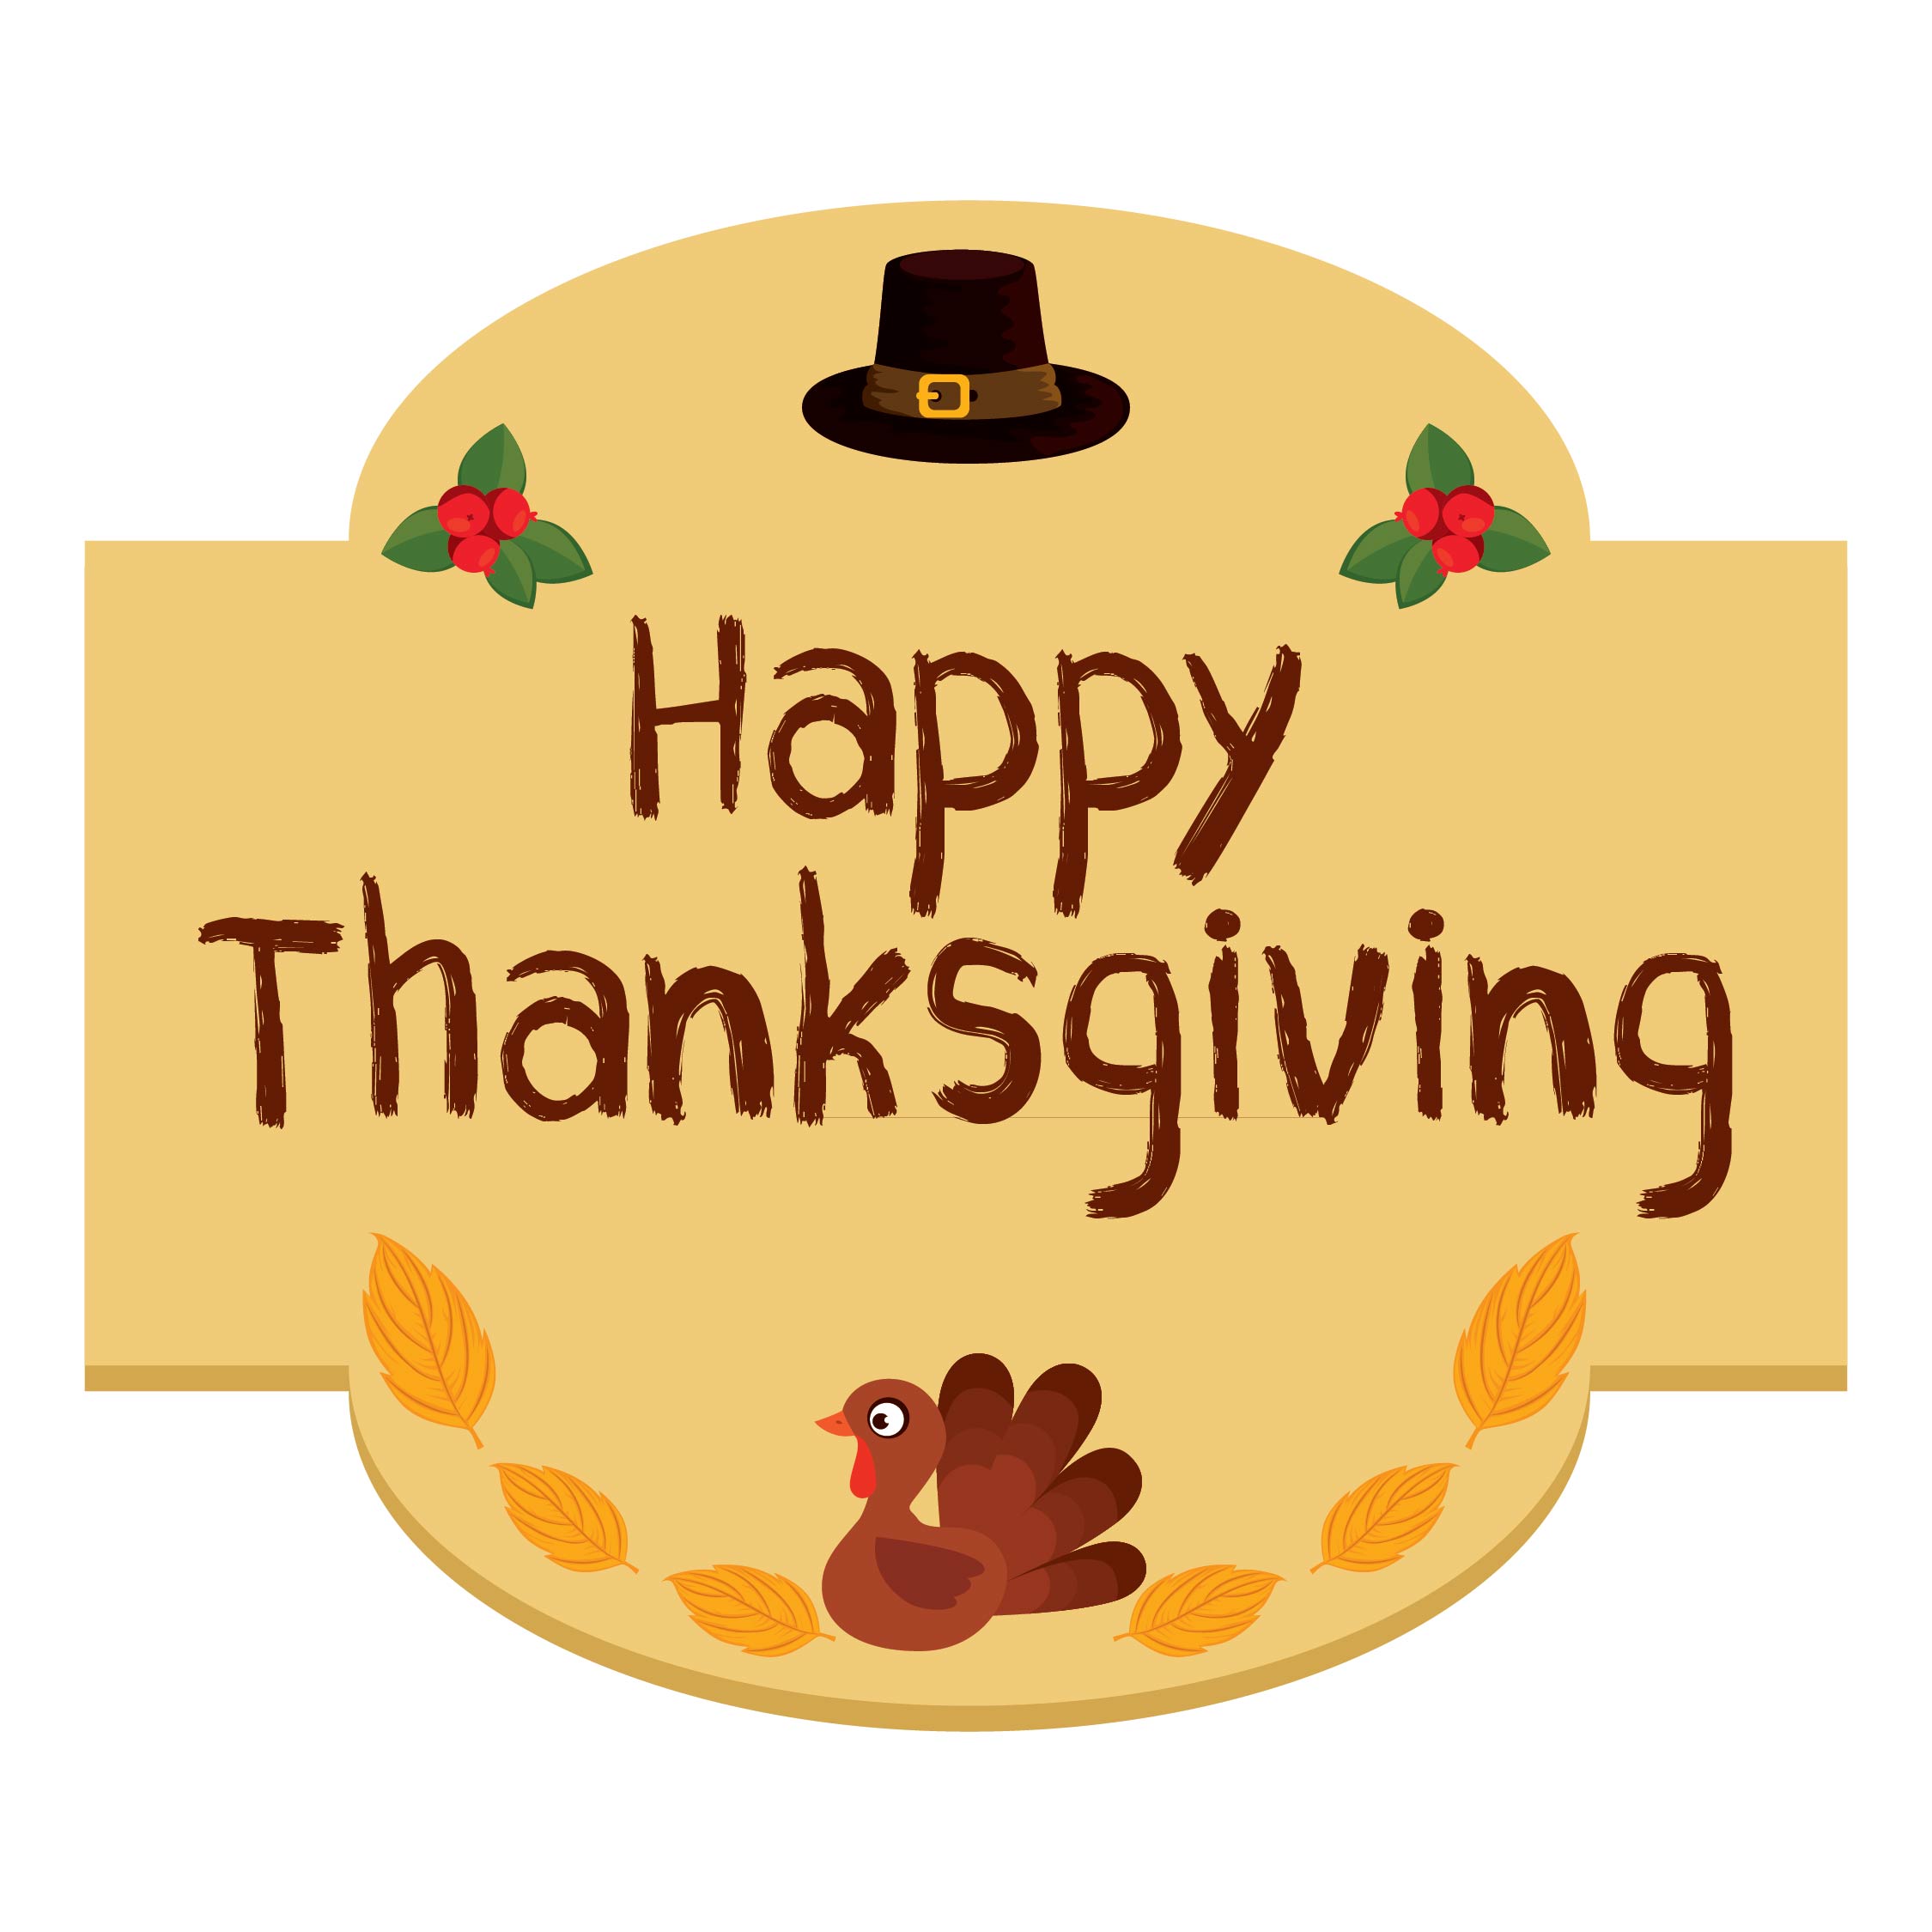 5 Best Images of Happy Thanksgiving Printable Signs Happy